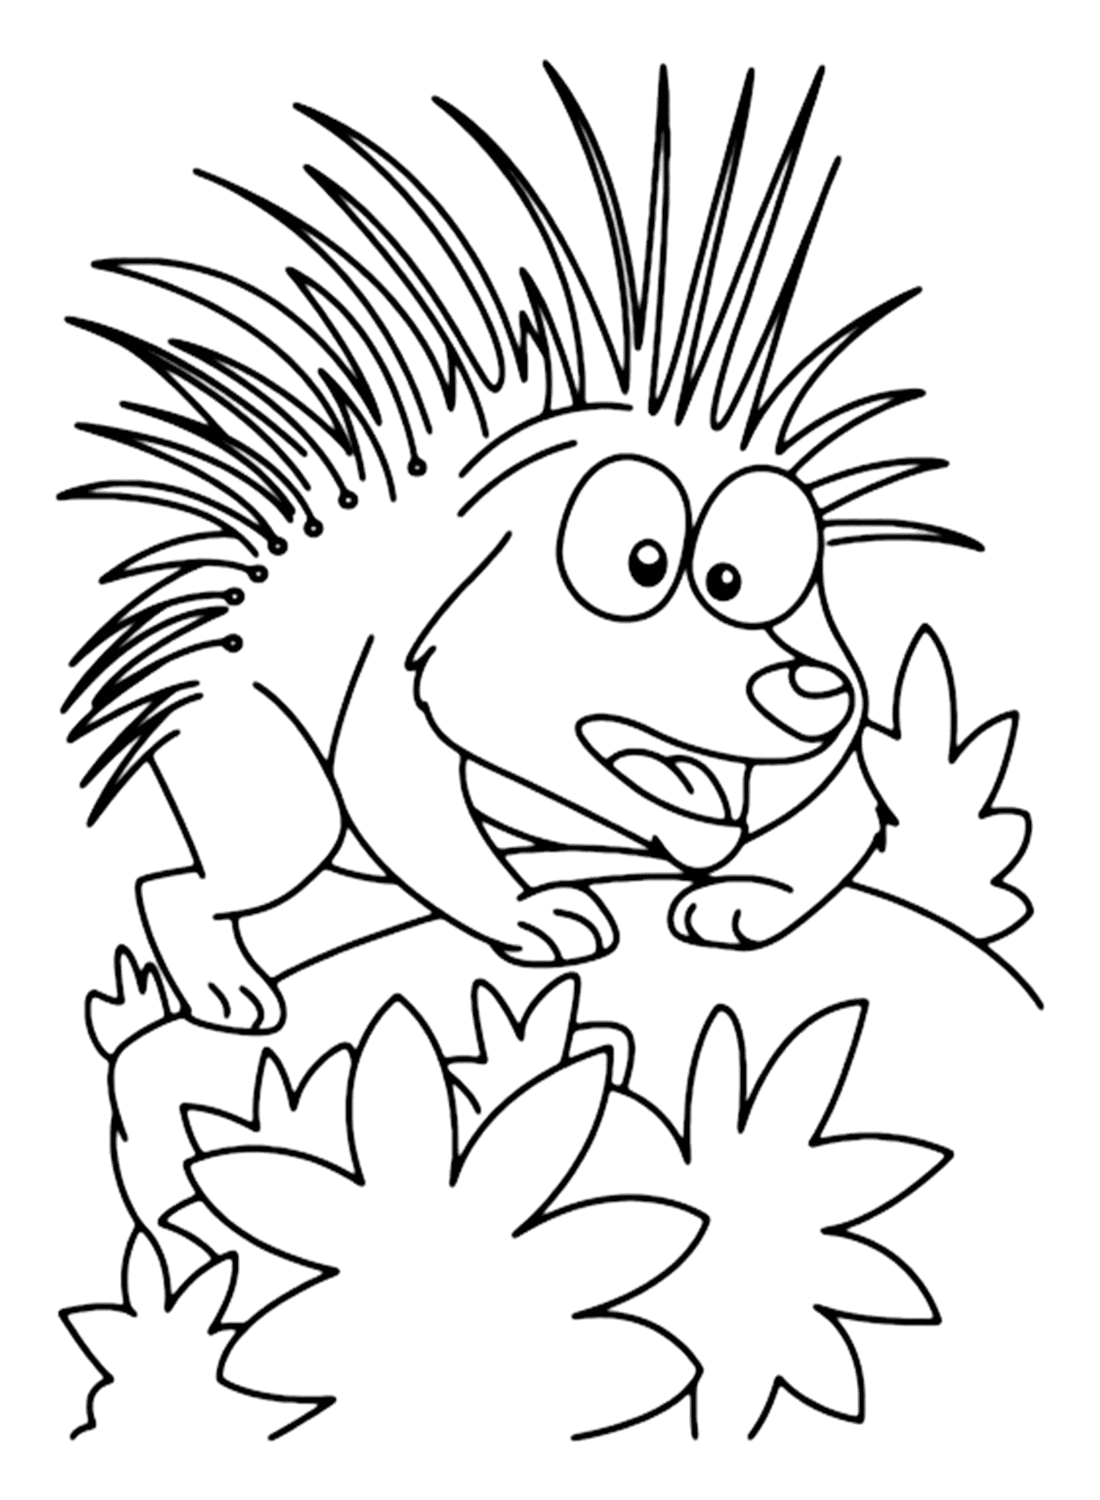 Adorable Porcupine Coloring Page For Kids from Porcupine